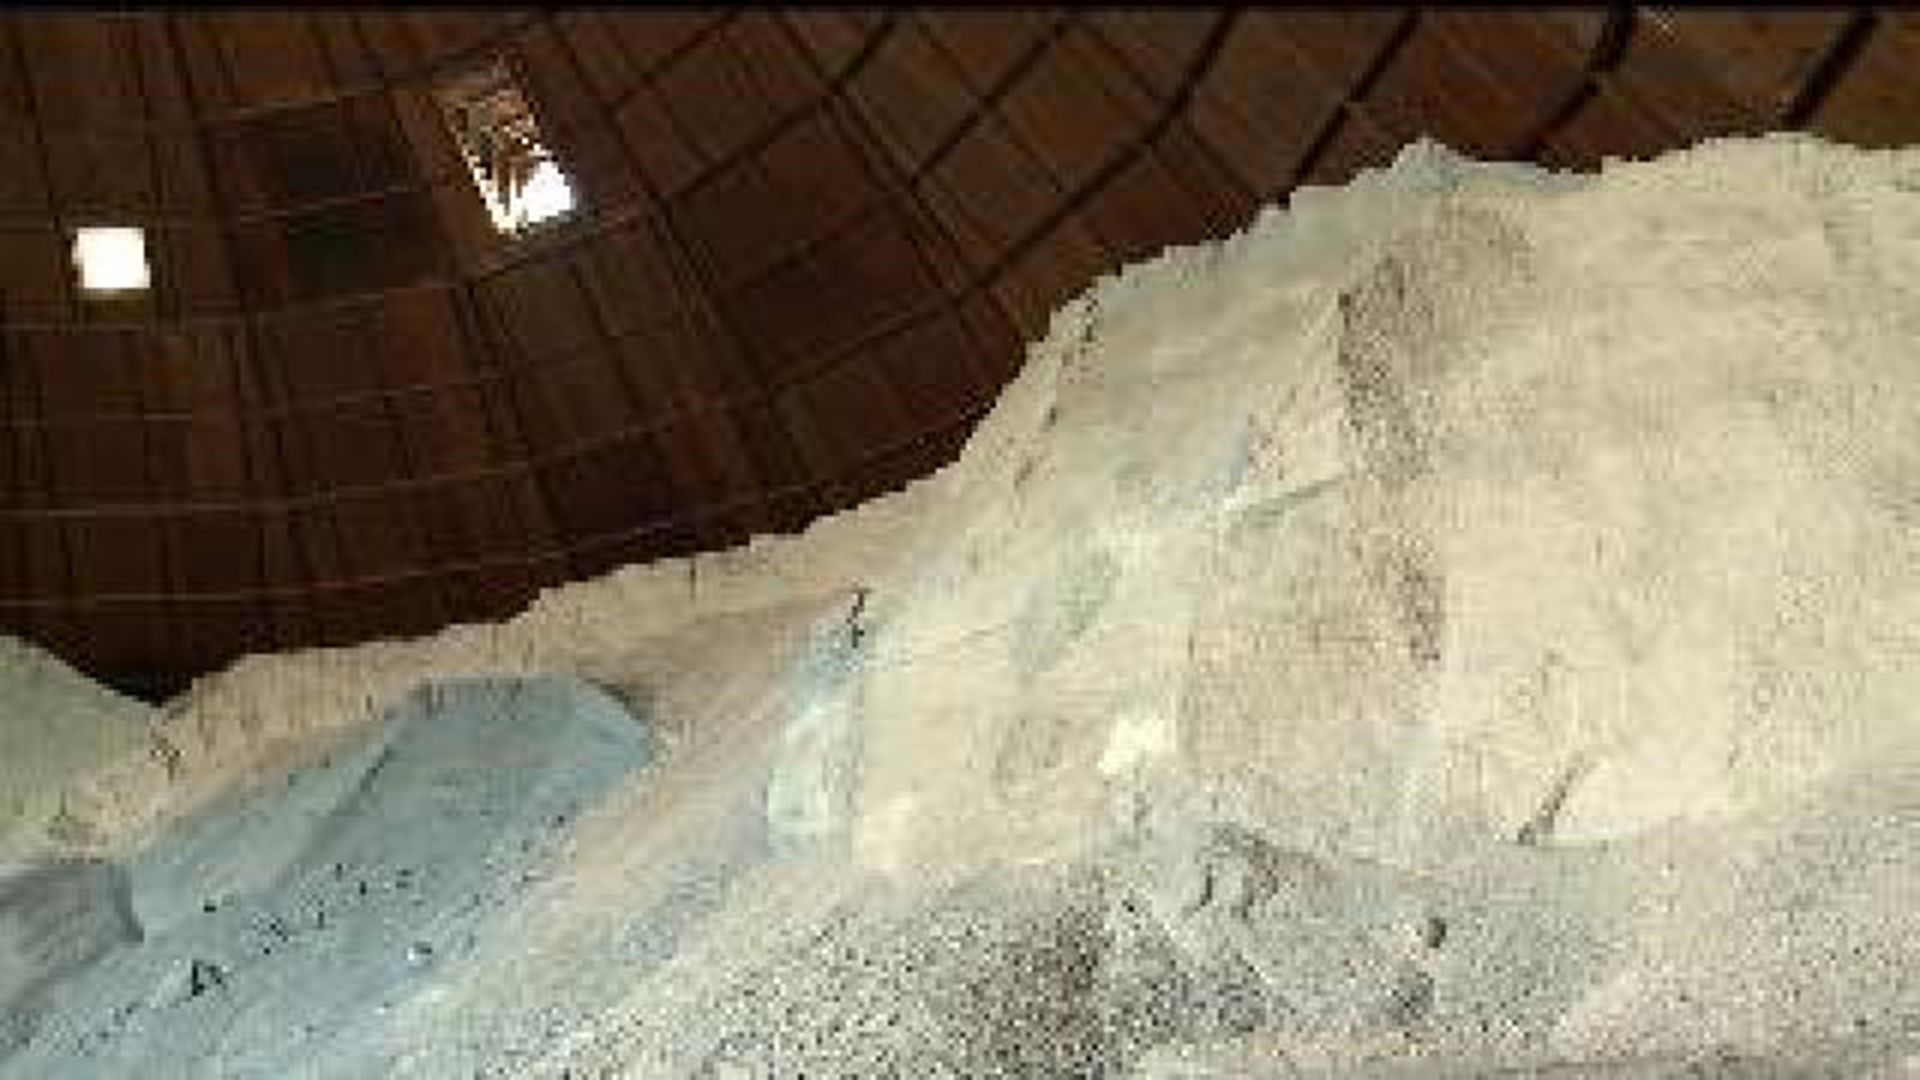 Salt supplies expected to last through winter